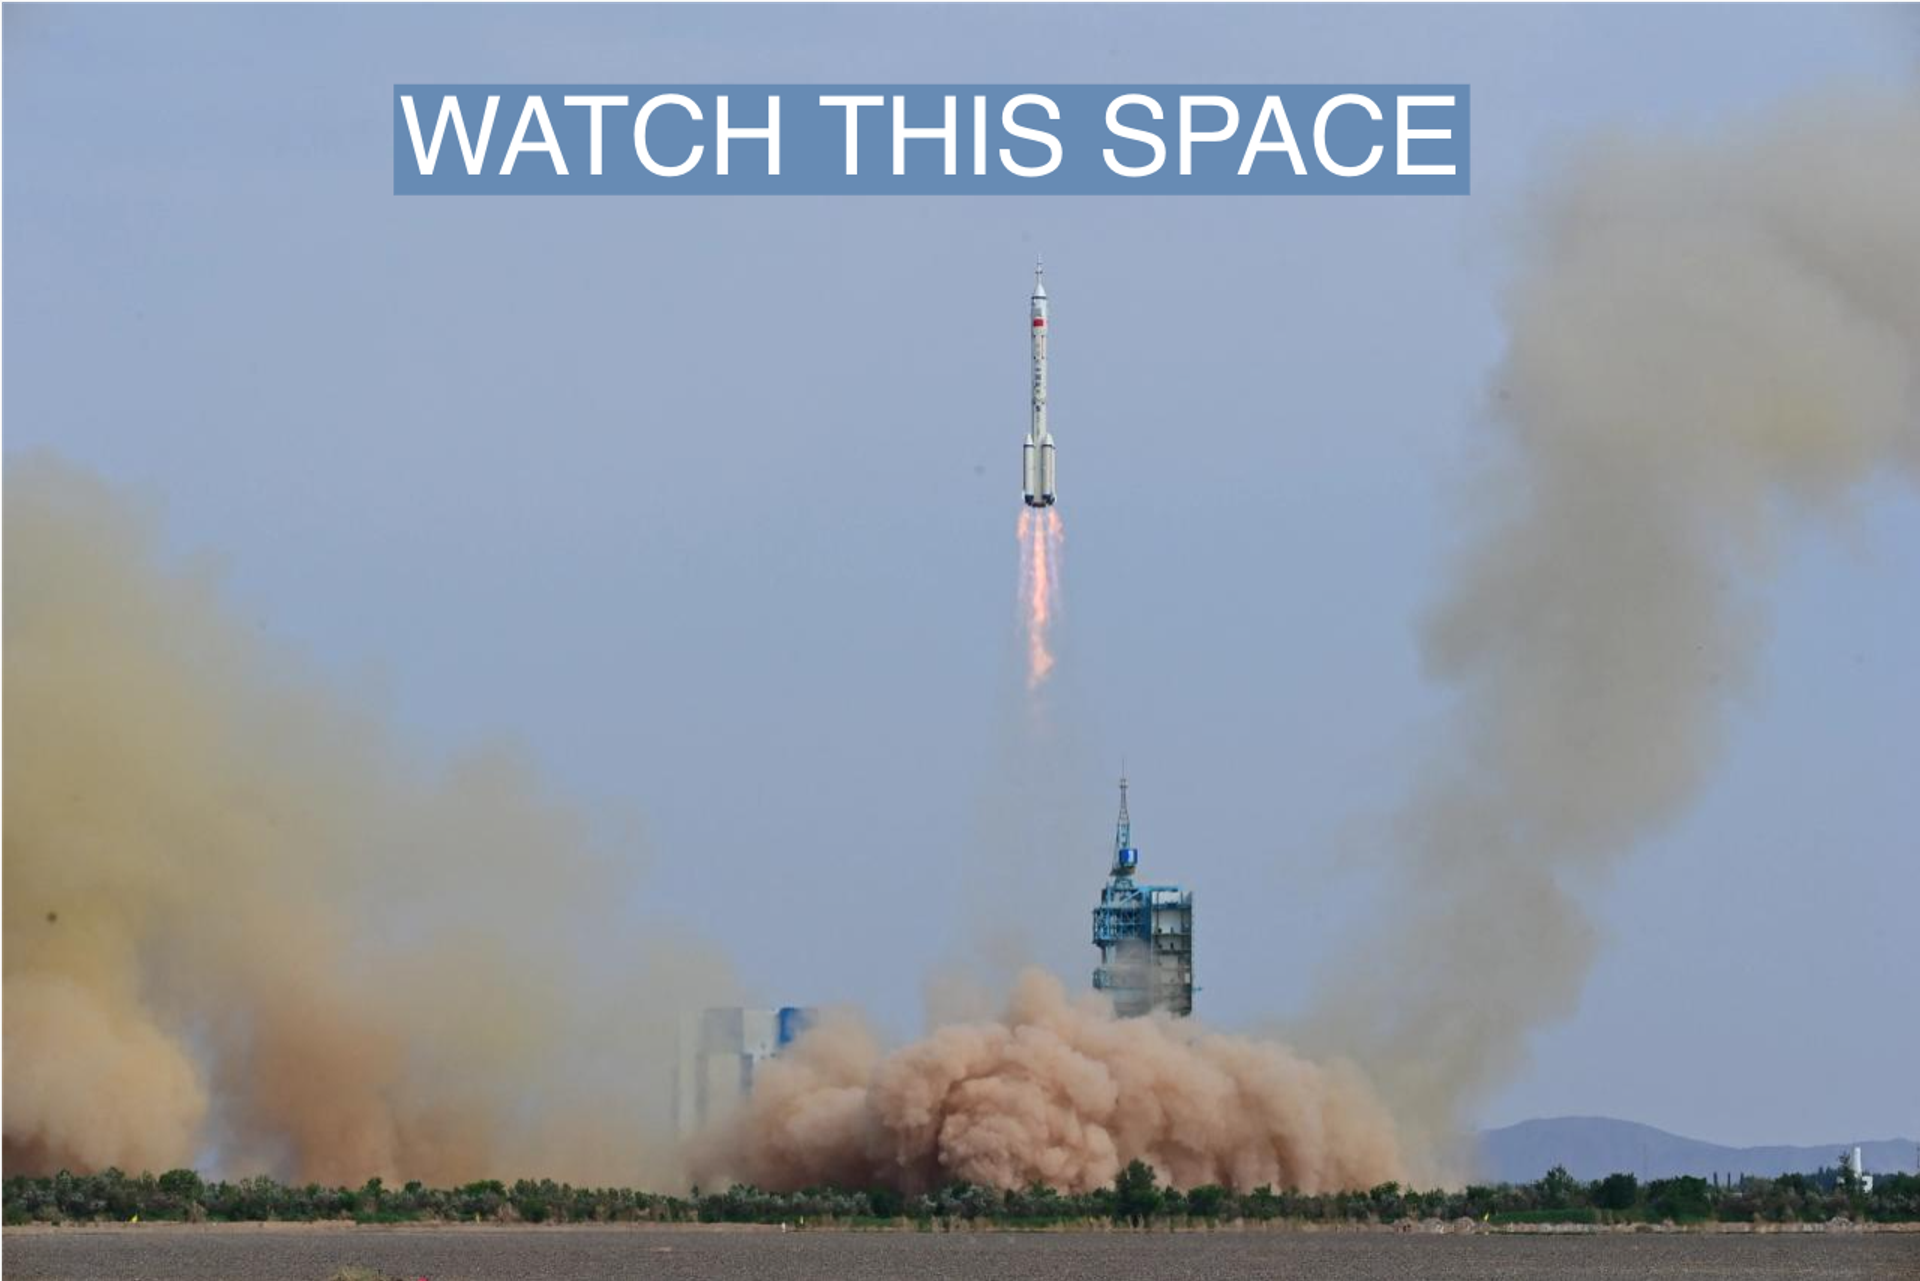 A rocket, carrying the Shenzhou-16 spacecraft and three astronauts, takes off from the launching area of Jiuquan Satellite Launch Center for a crewed mission to China's Tiangong space station.